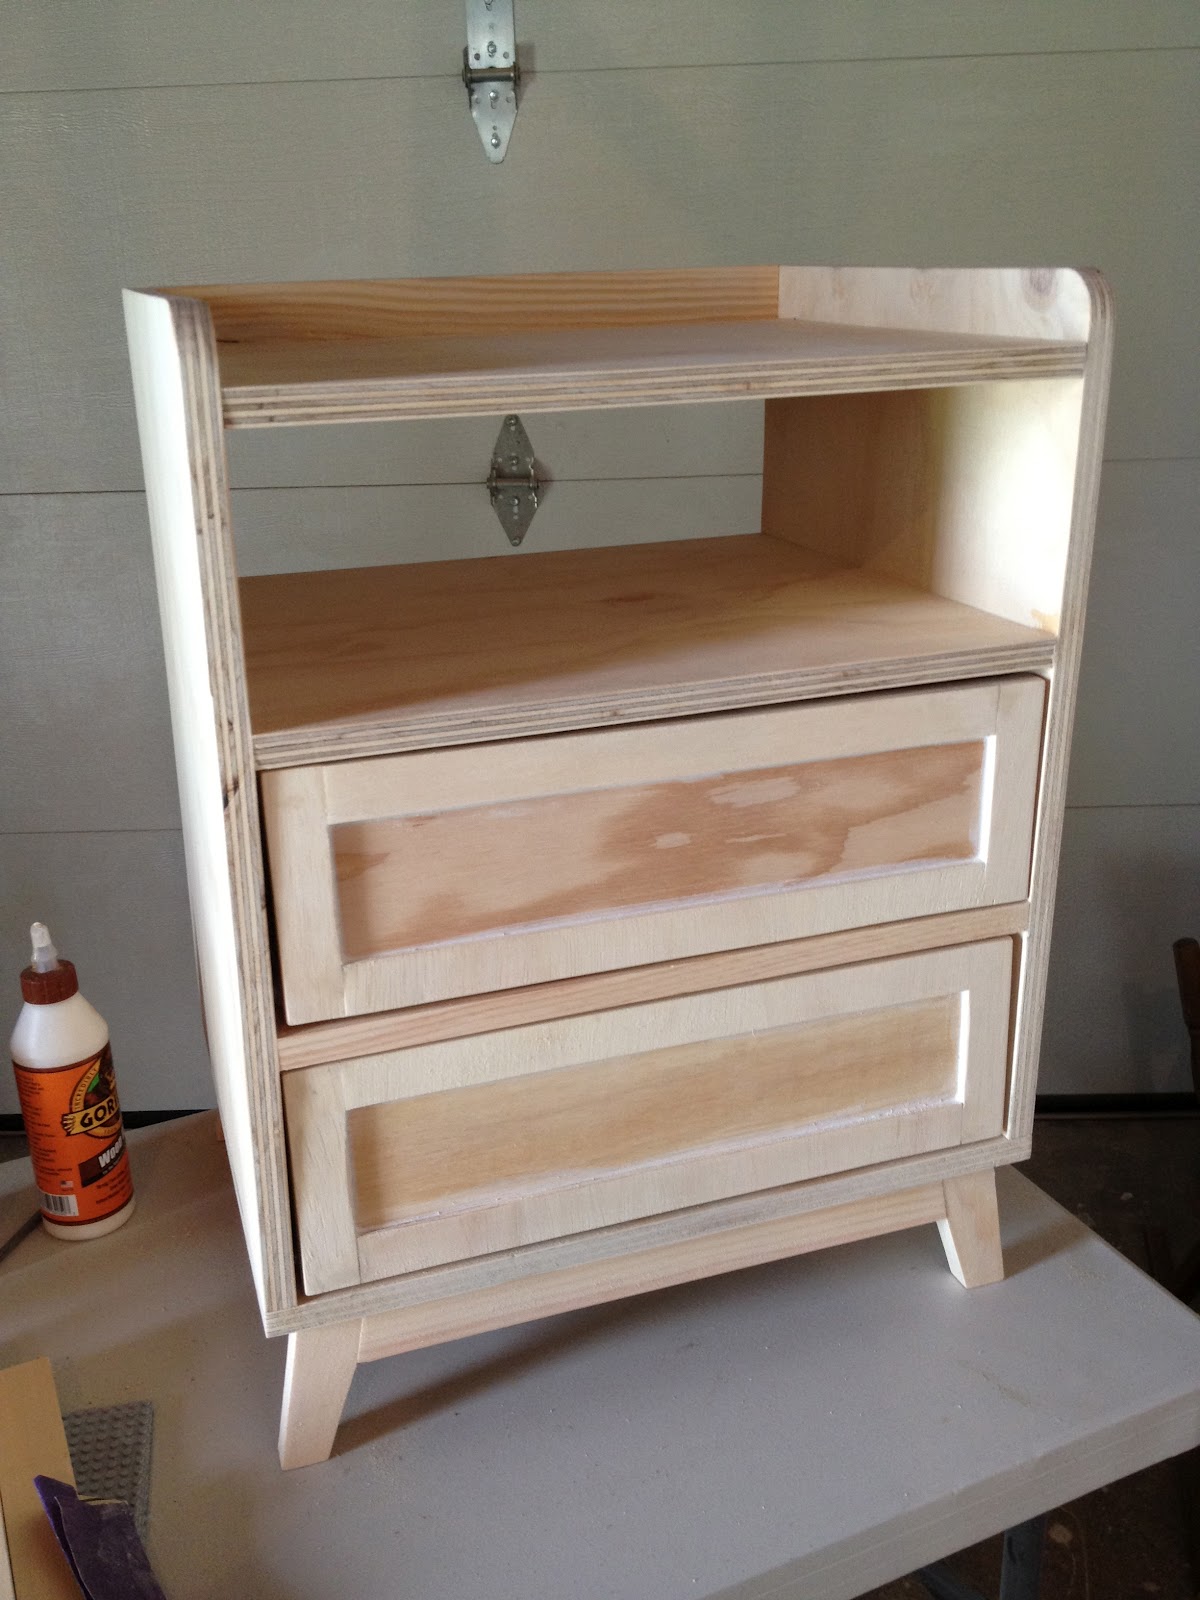 That's My Letter: DIY Mod Nightstand